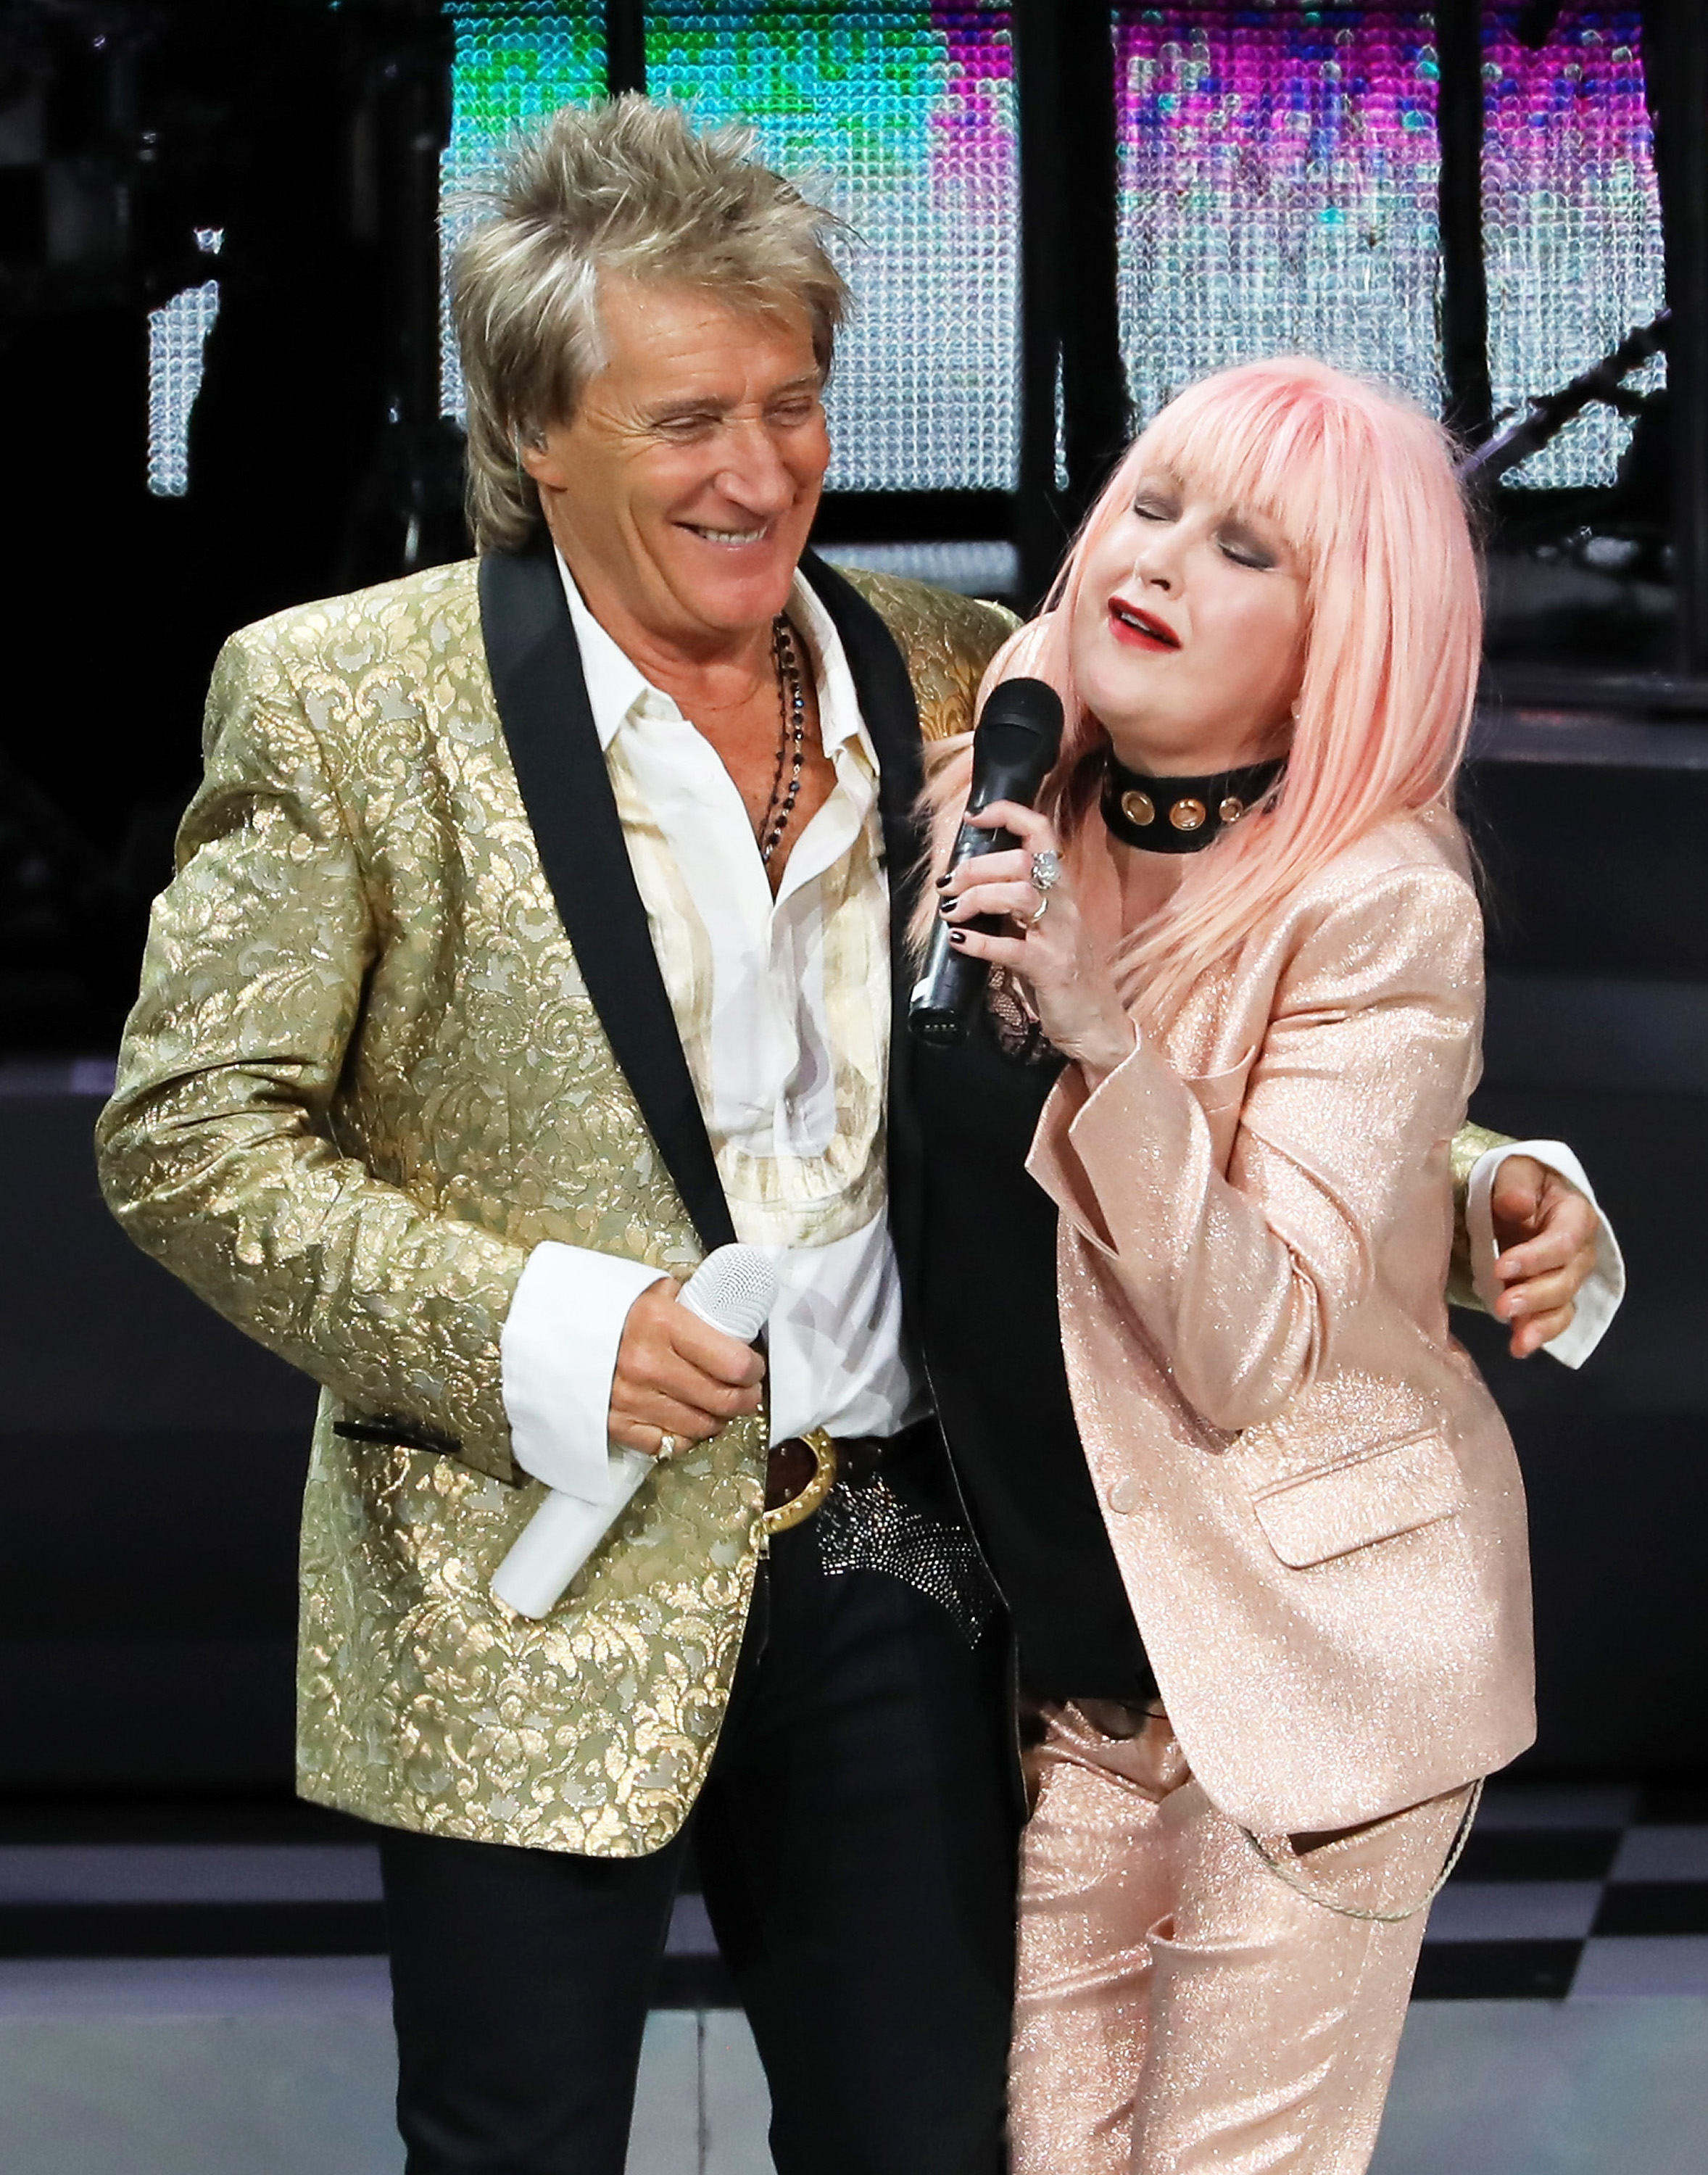 Rod Stewart and Cyndi Lauper perform at Hollywood Casino Amphitheatre on August 5, 2017, in Tinley Park, Illinois | Source: Getty Images